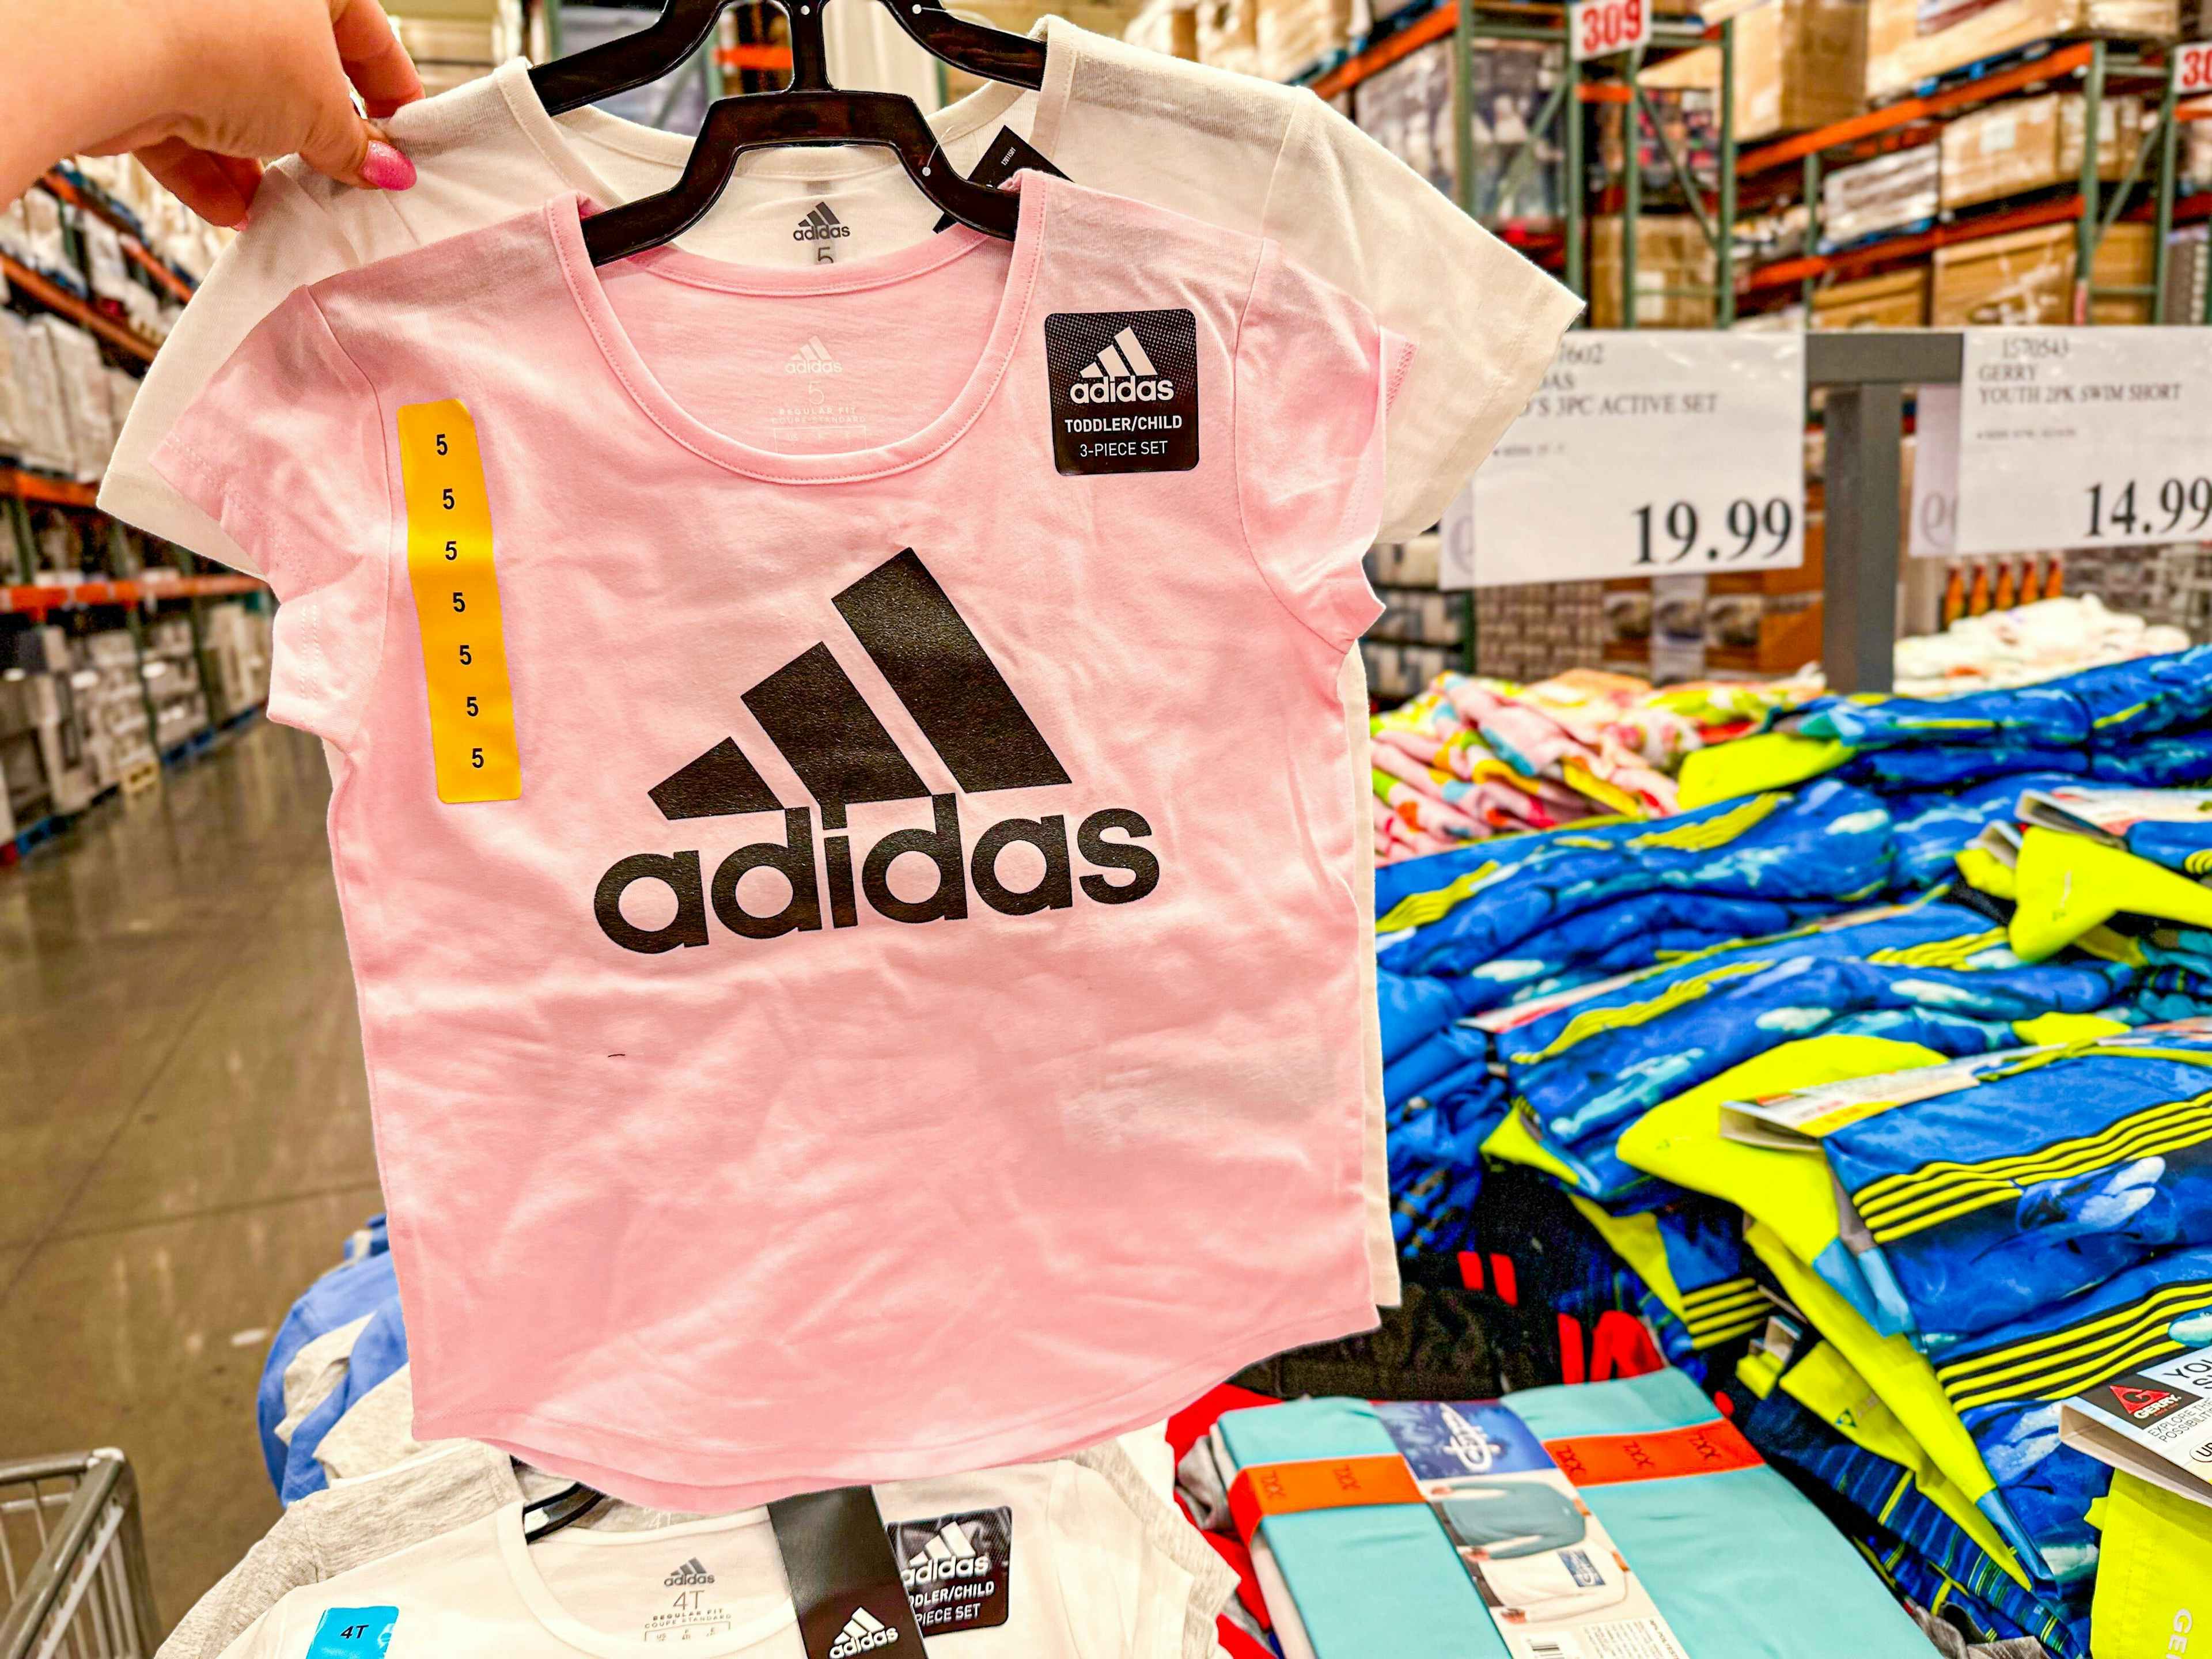 costco-wholesale-clothing-brands-adidas-kids-activewear-sets-kcl-4